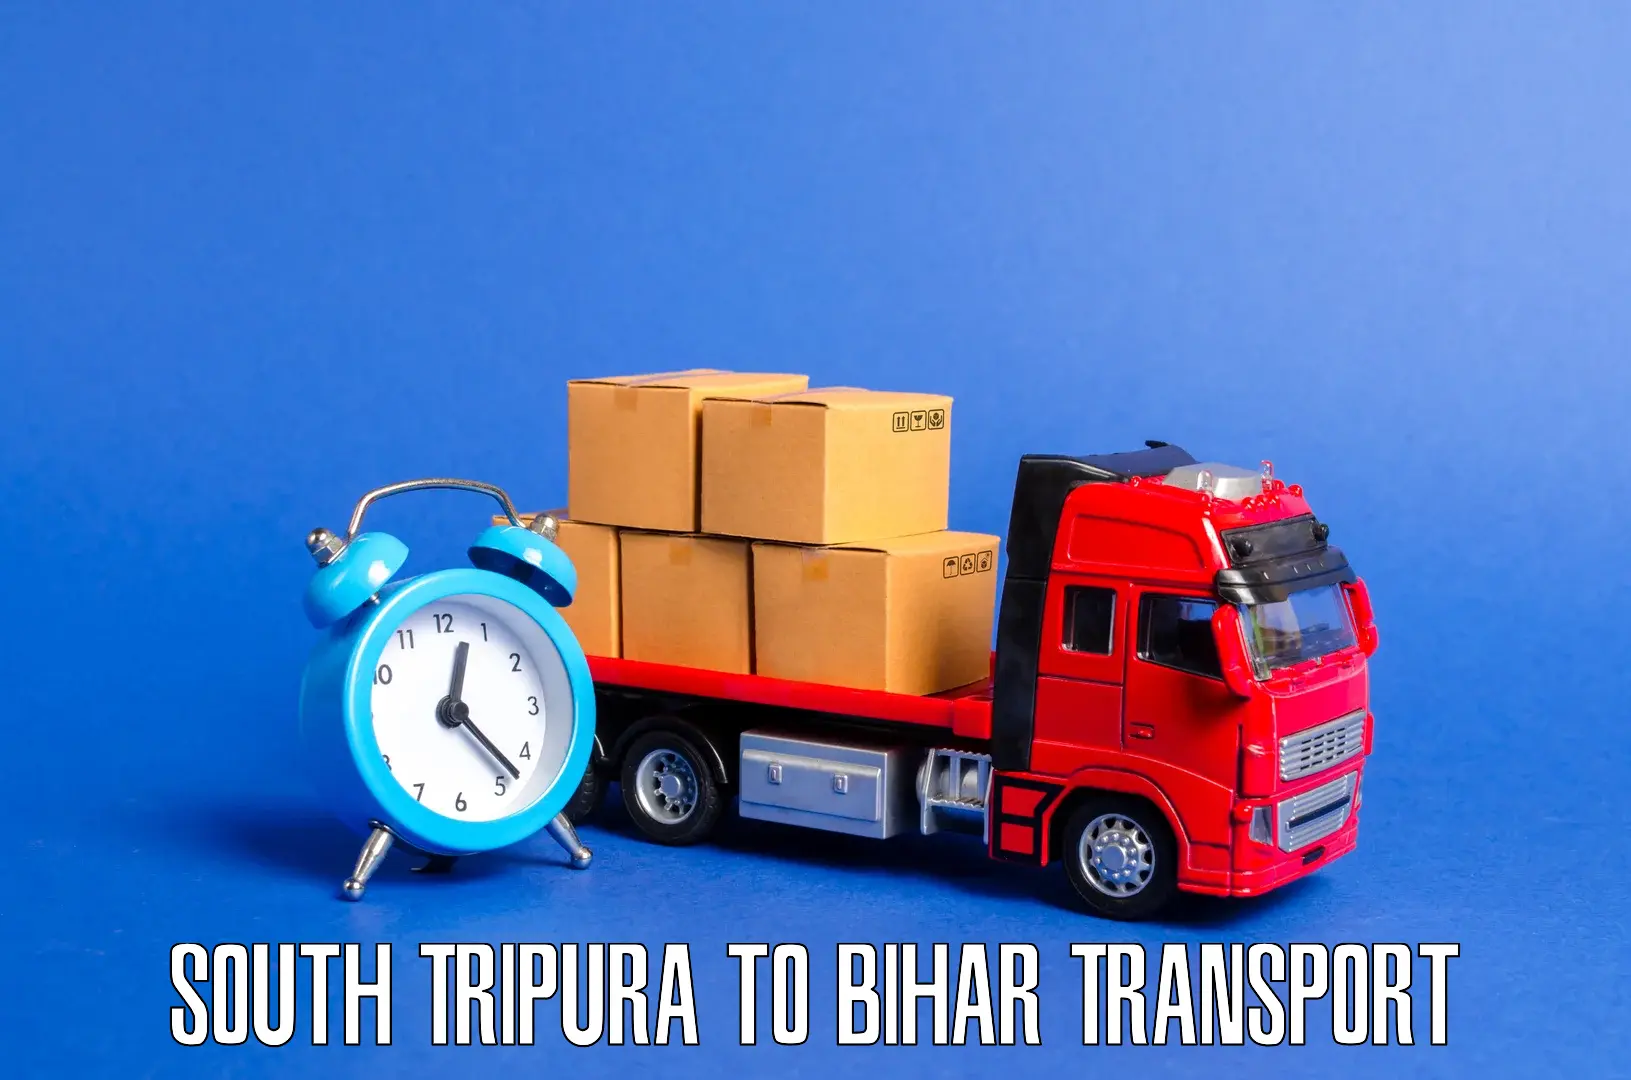 Daily parcel service transport South Tripura to Kamtaul